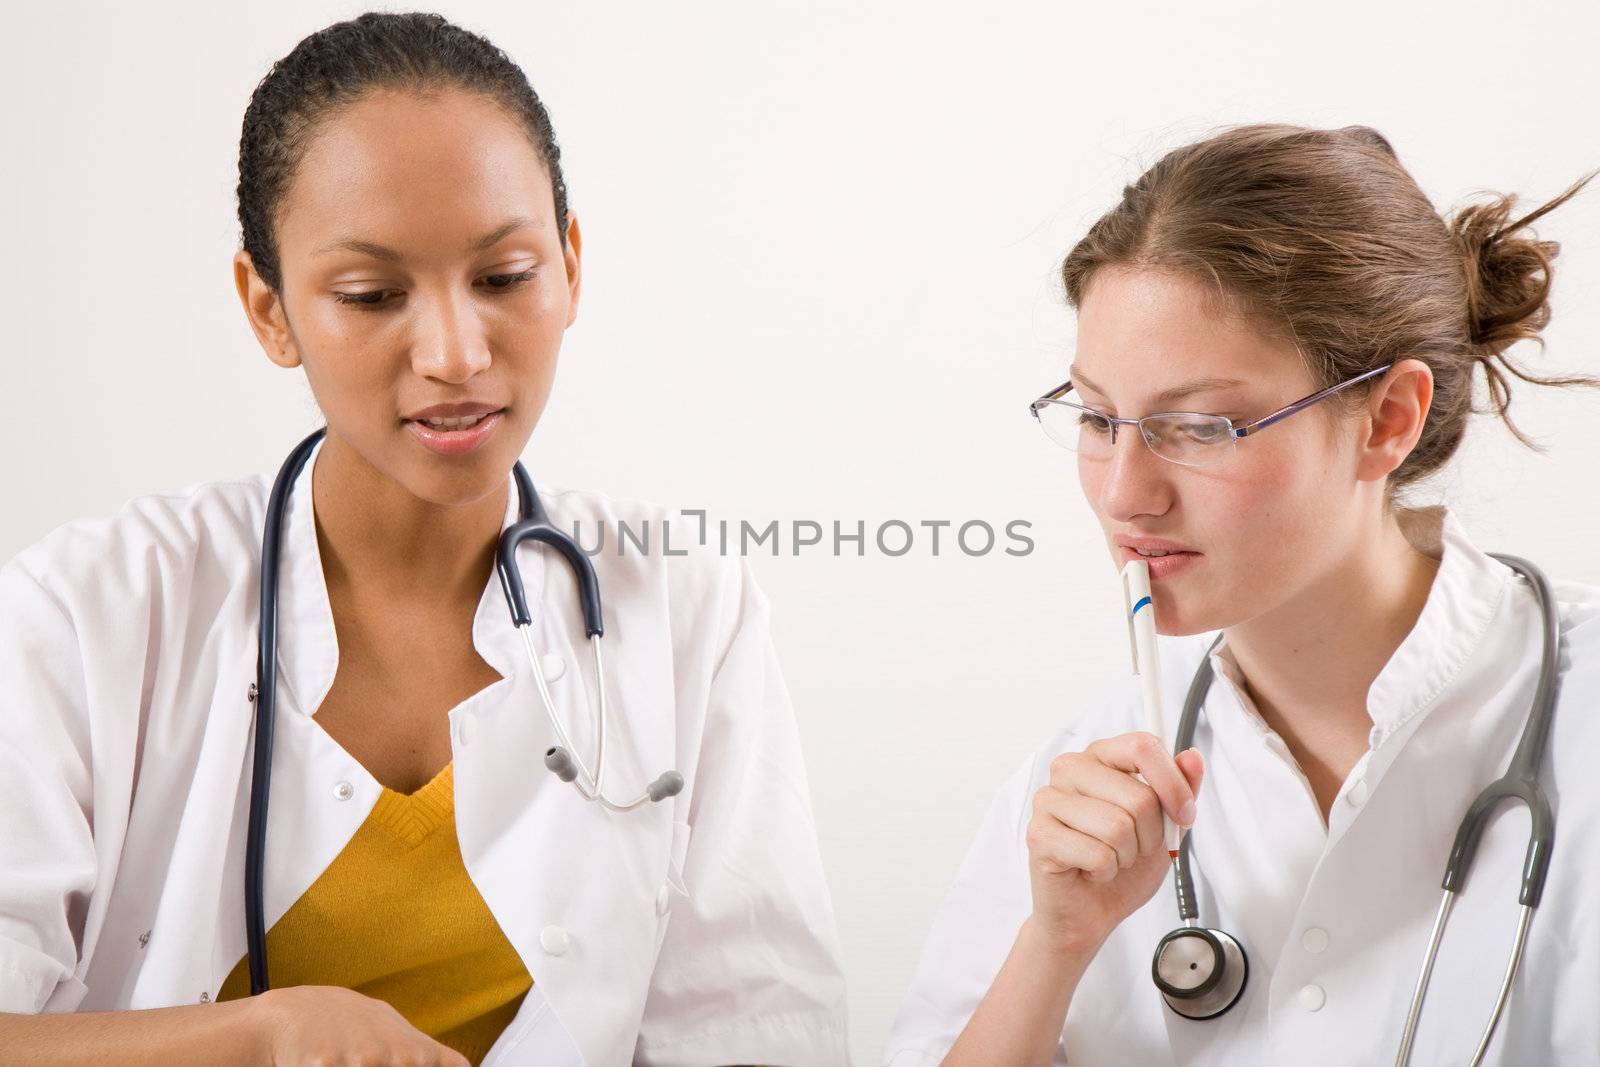 Two medical students discussing something together in the office